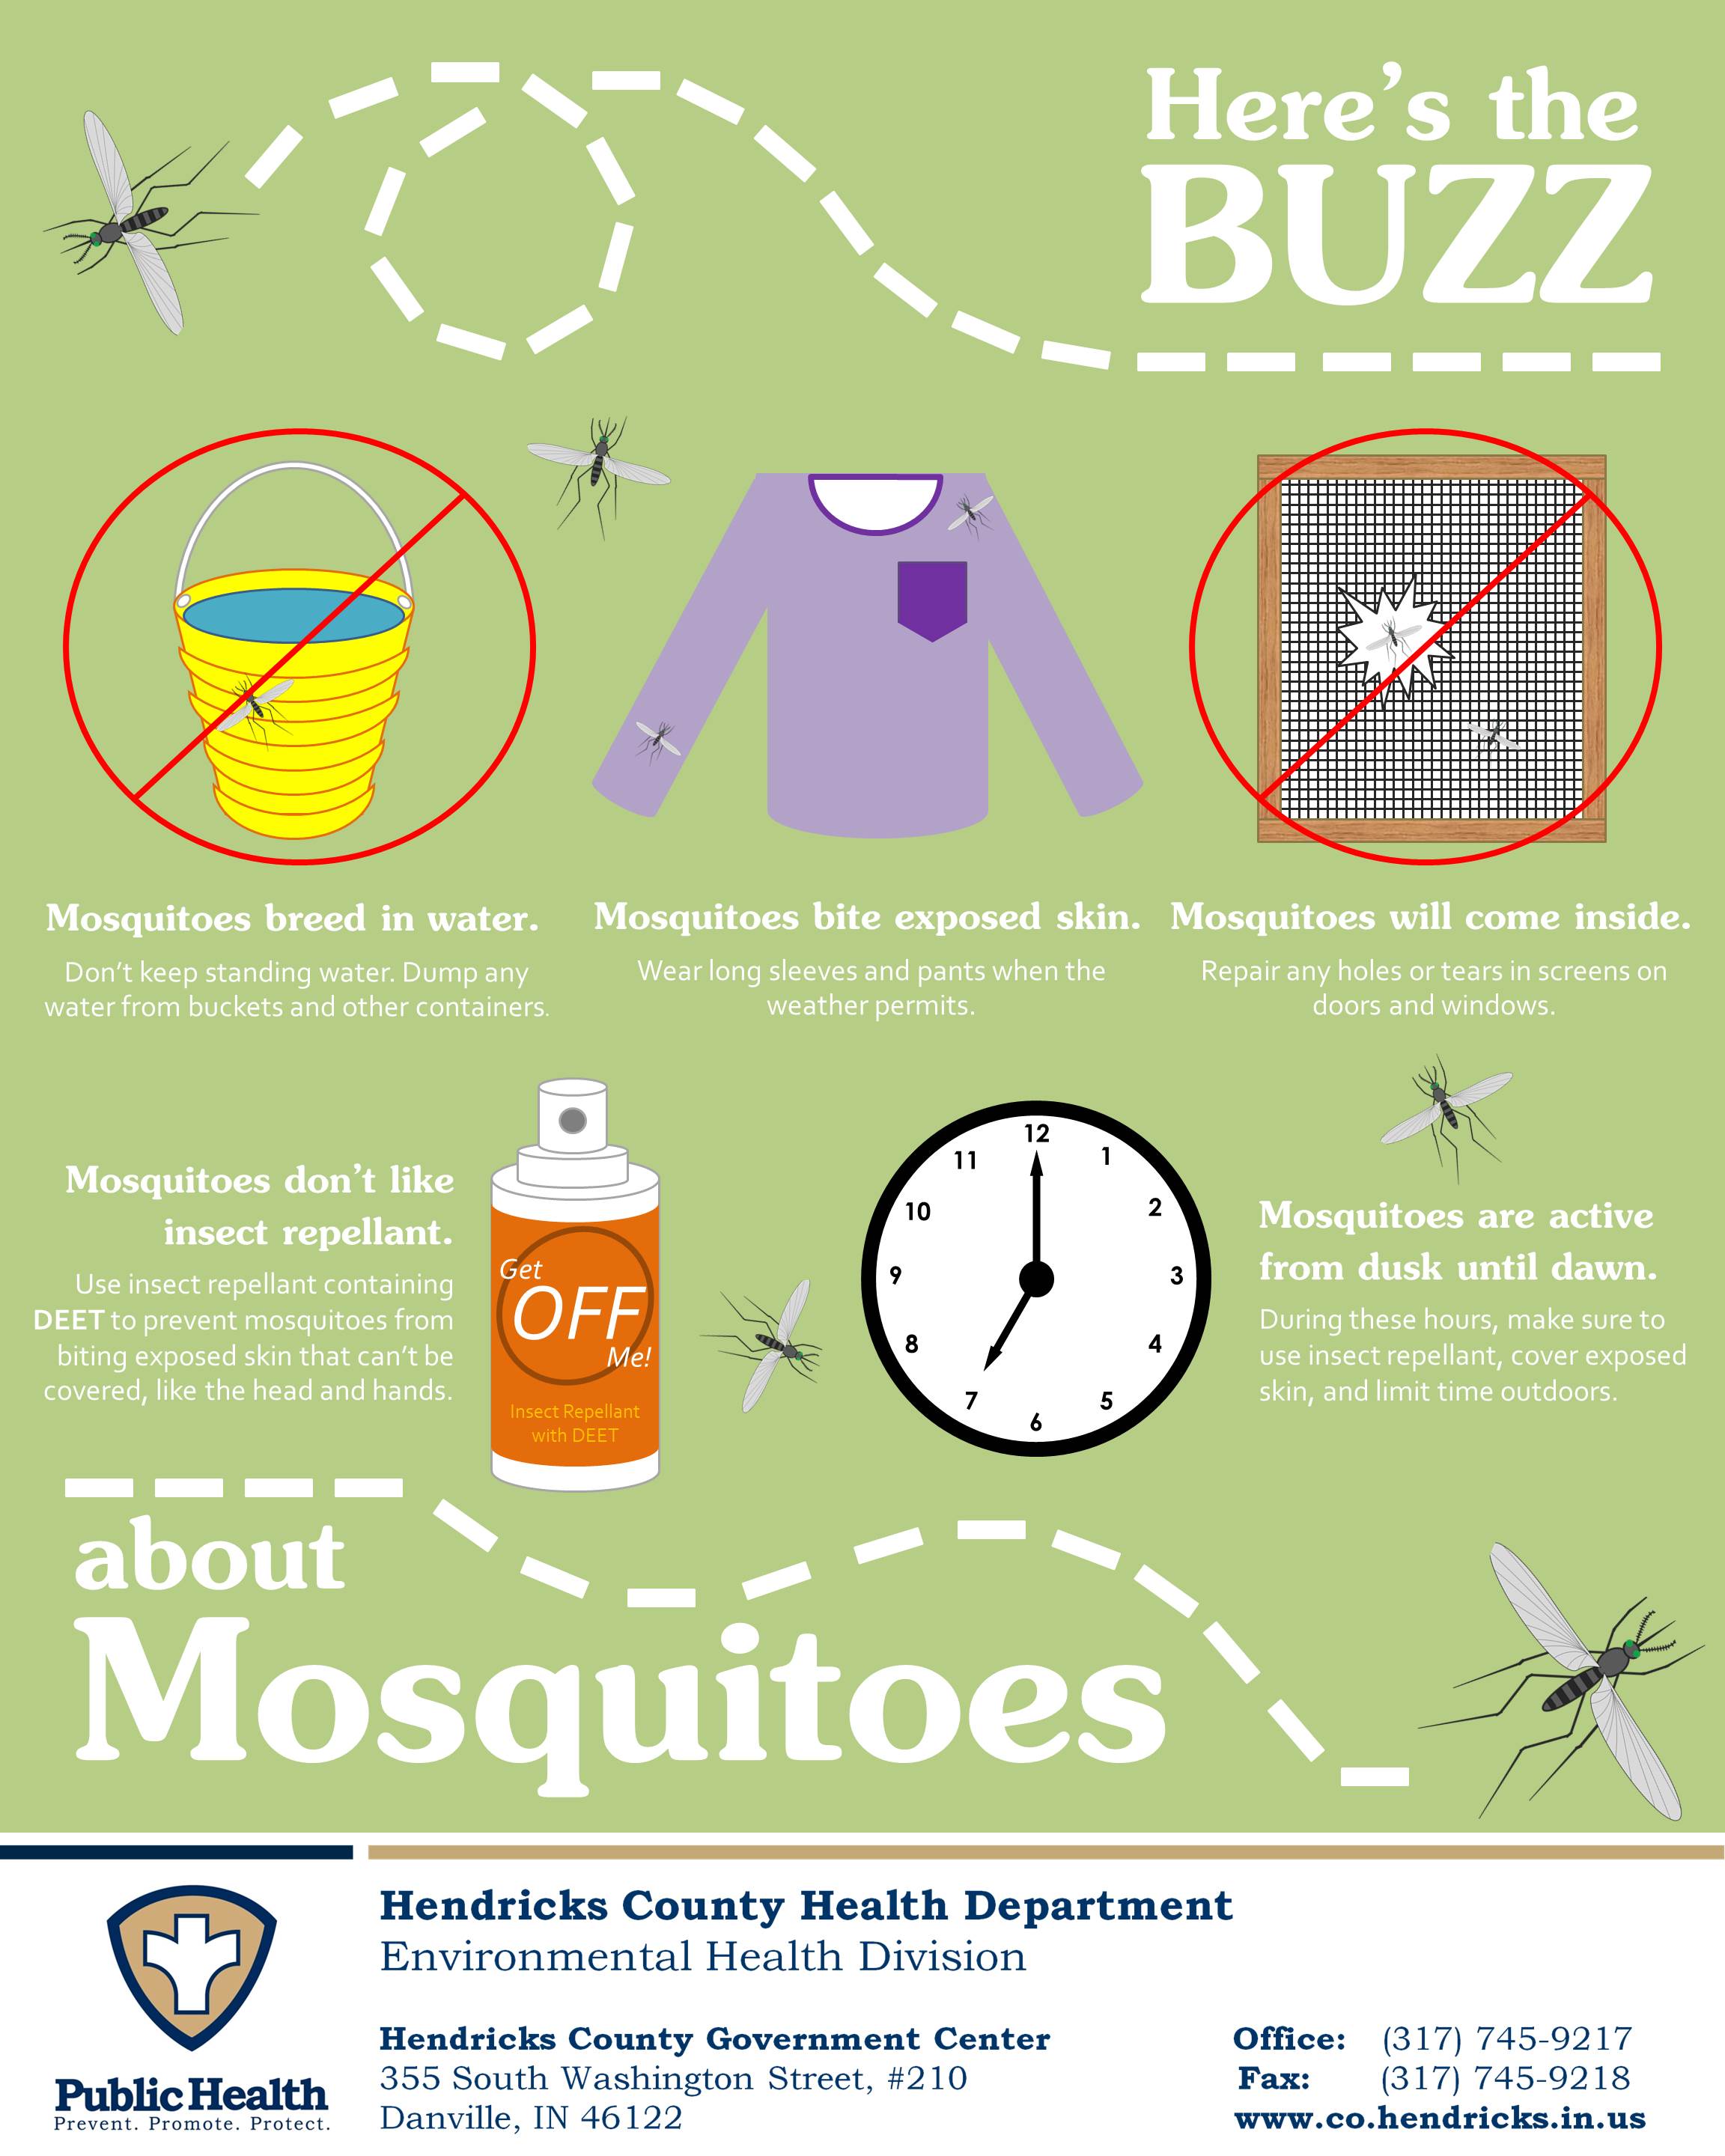 Here's the Buzz about Mosquitoes